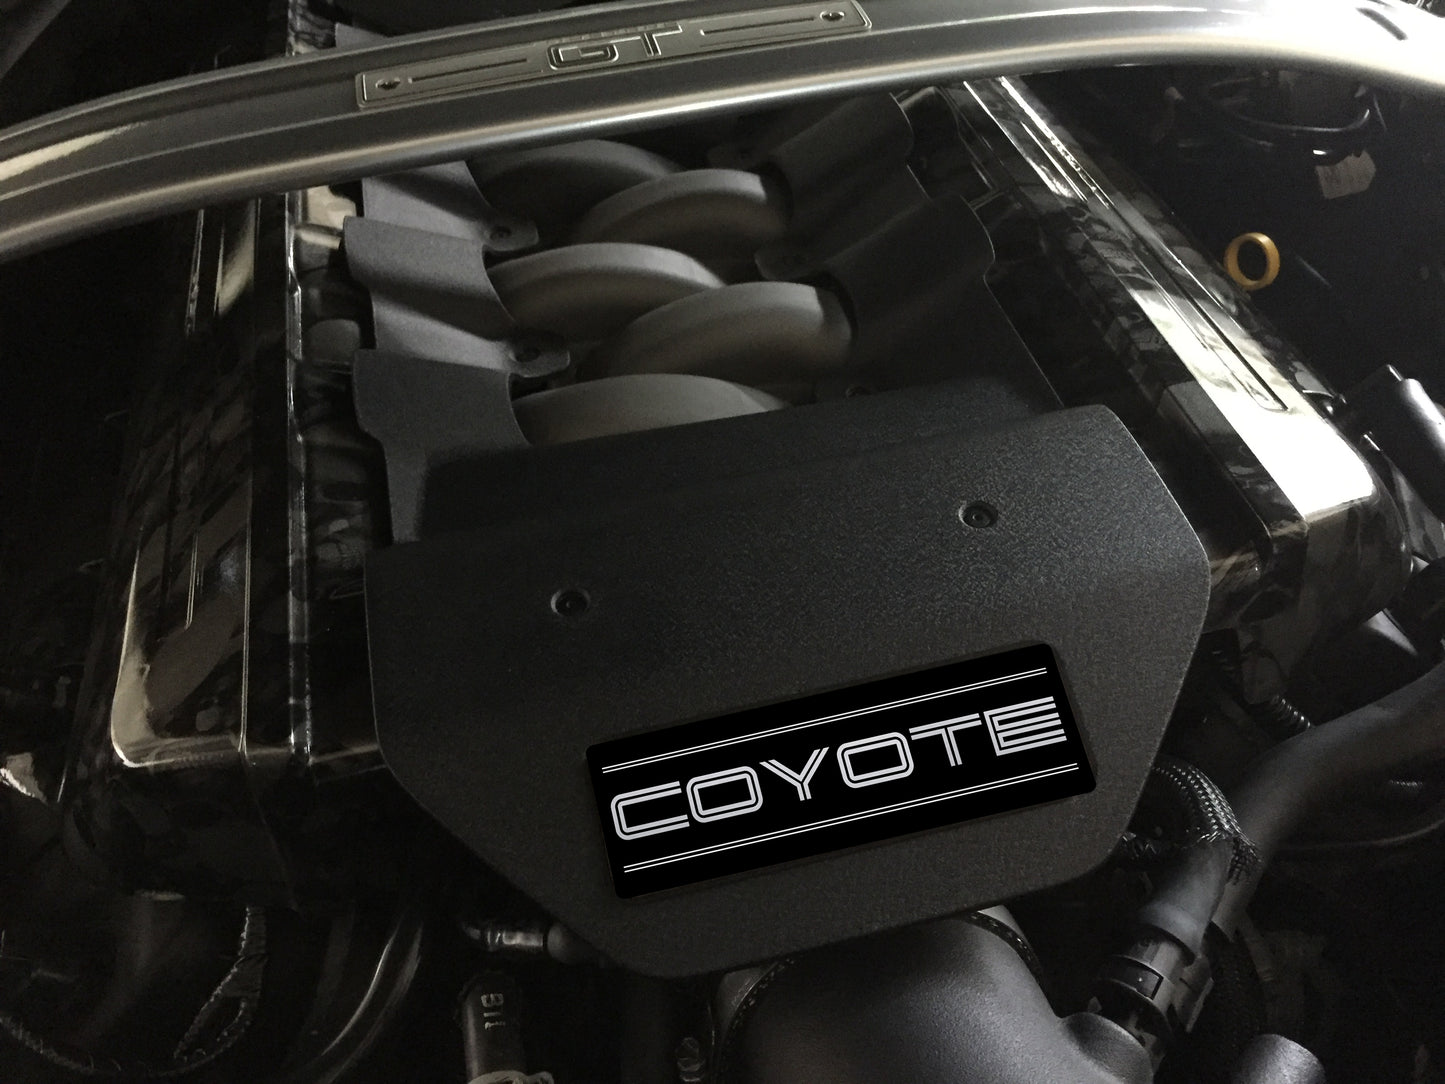 Aluminum Engine Cover Plate [S21] Coyote Lines (2015-2017 Mustang)